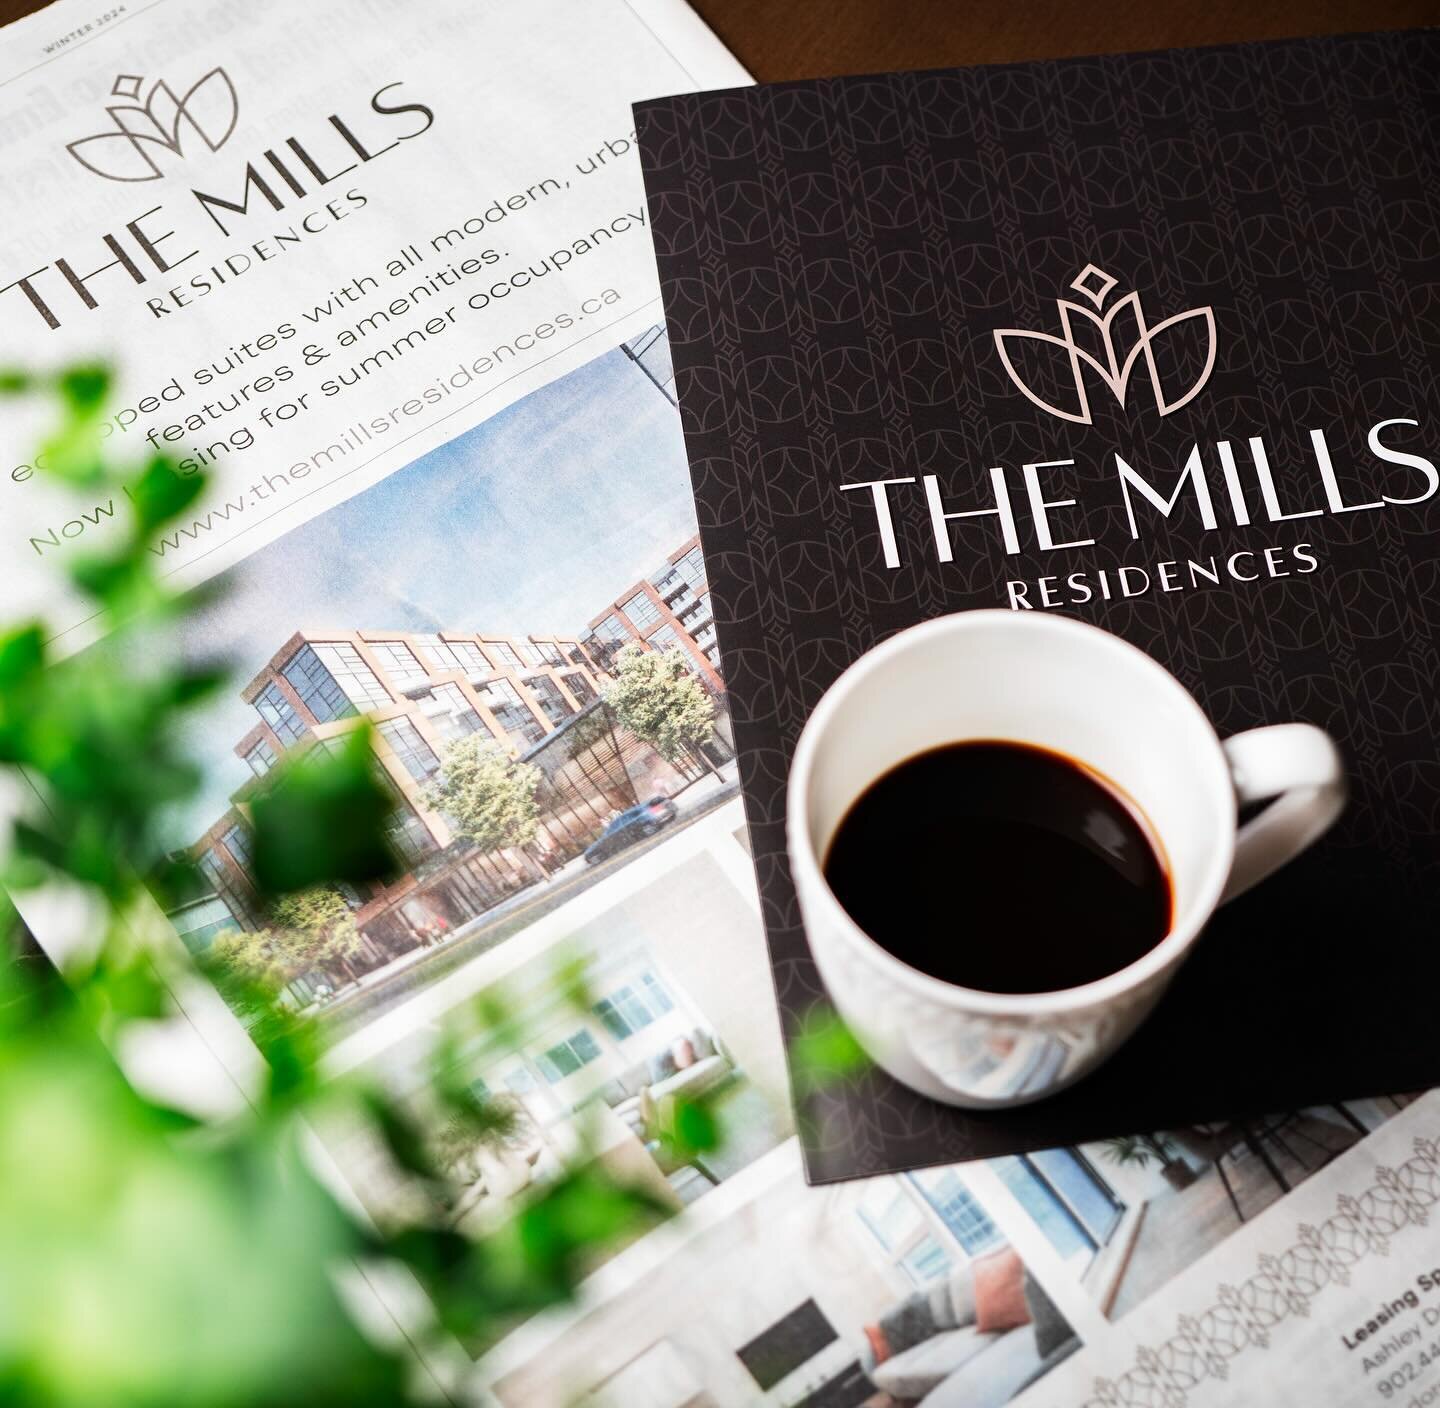 Stop by The Mills Leasing Centre for a cup of coffee. Meet with our professional leasing team. They will help you select a modern apartment in the historic heart of Downtown Halifax to best suit your lifestyle. Conveniently located at 5466 Spring Gar